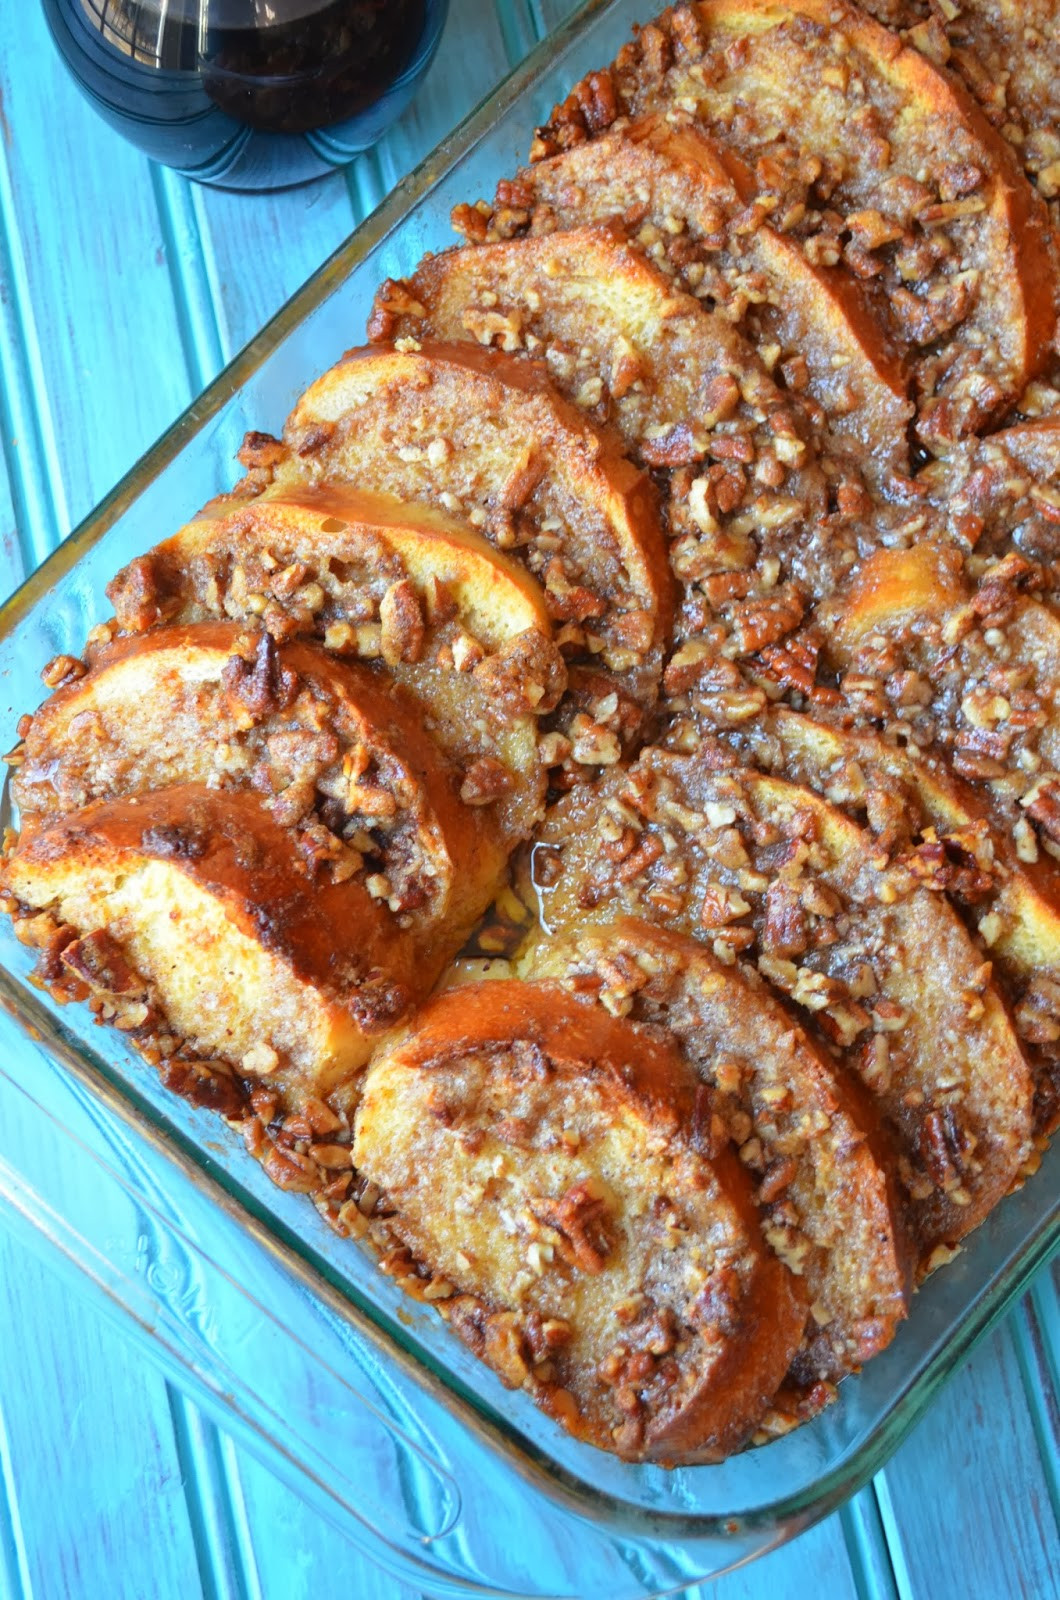 Baked French Toast Casserole
 The Savvy Kitchen Baked French Toast Casserole with